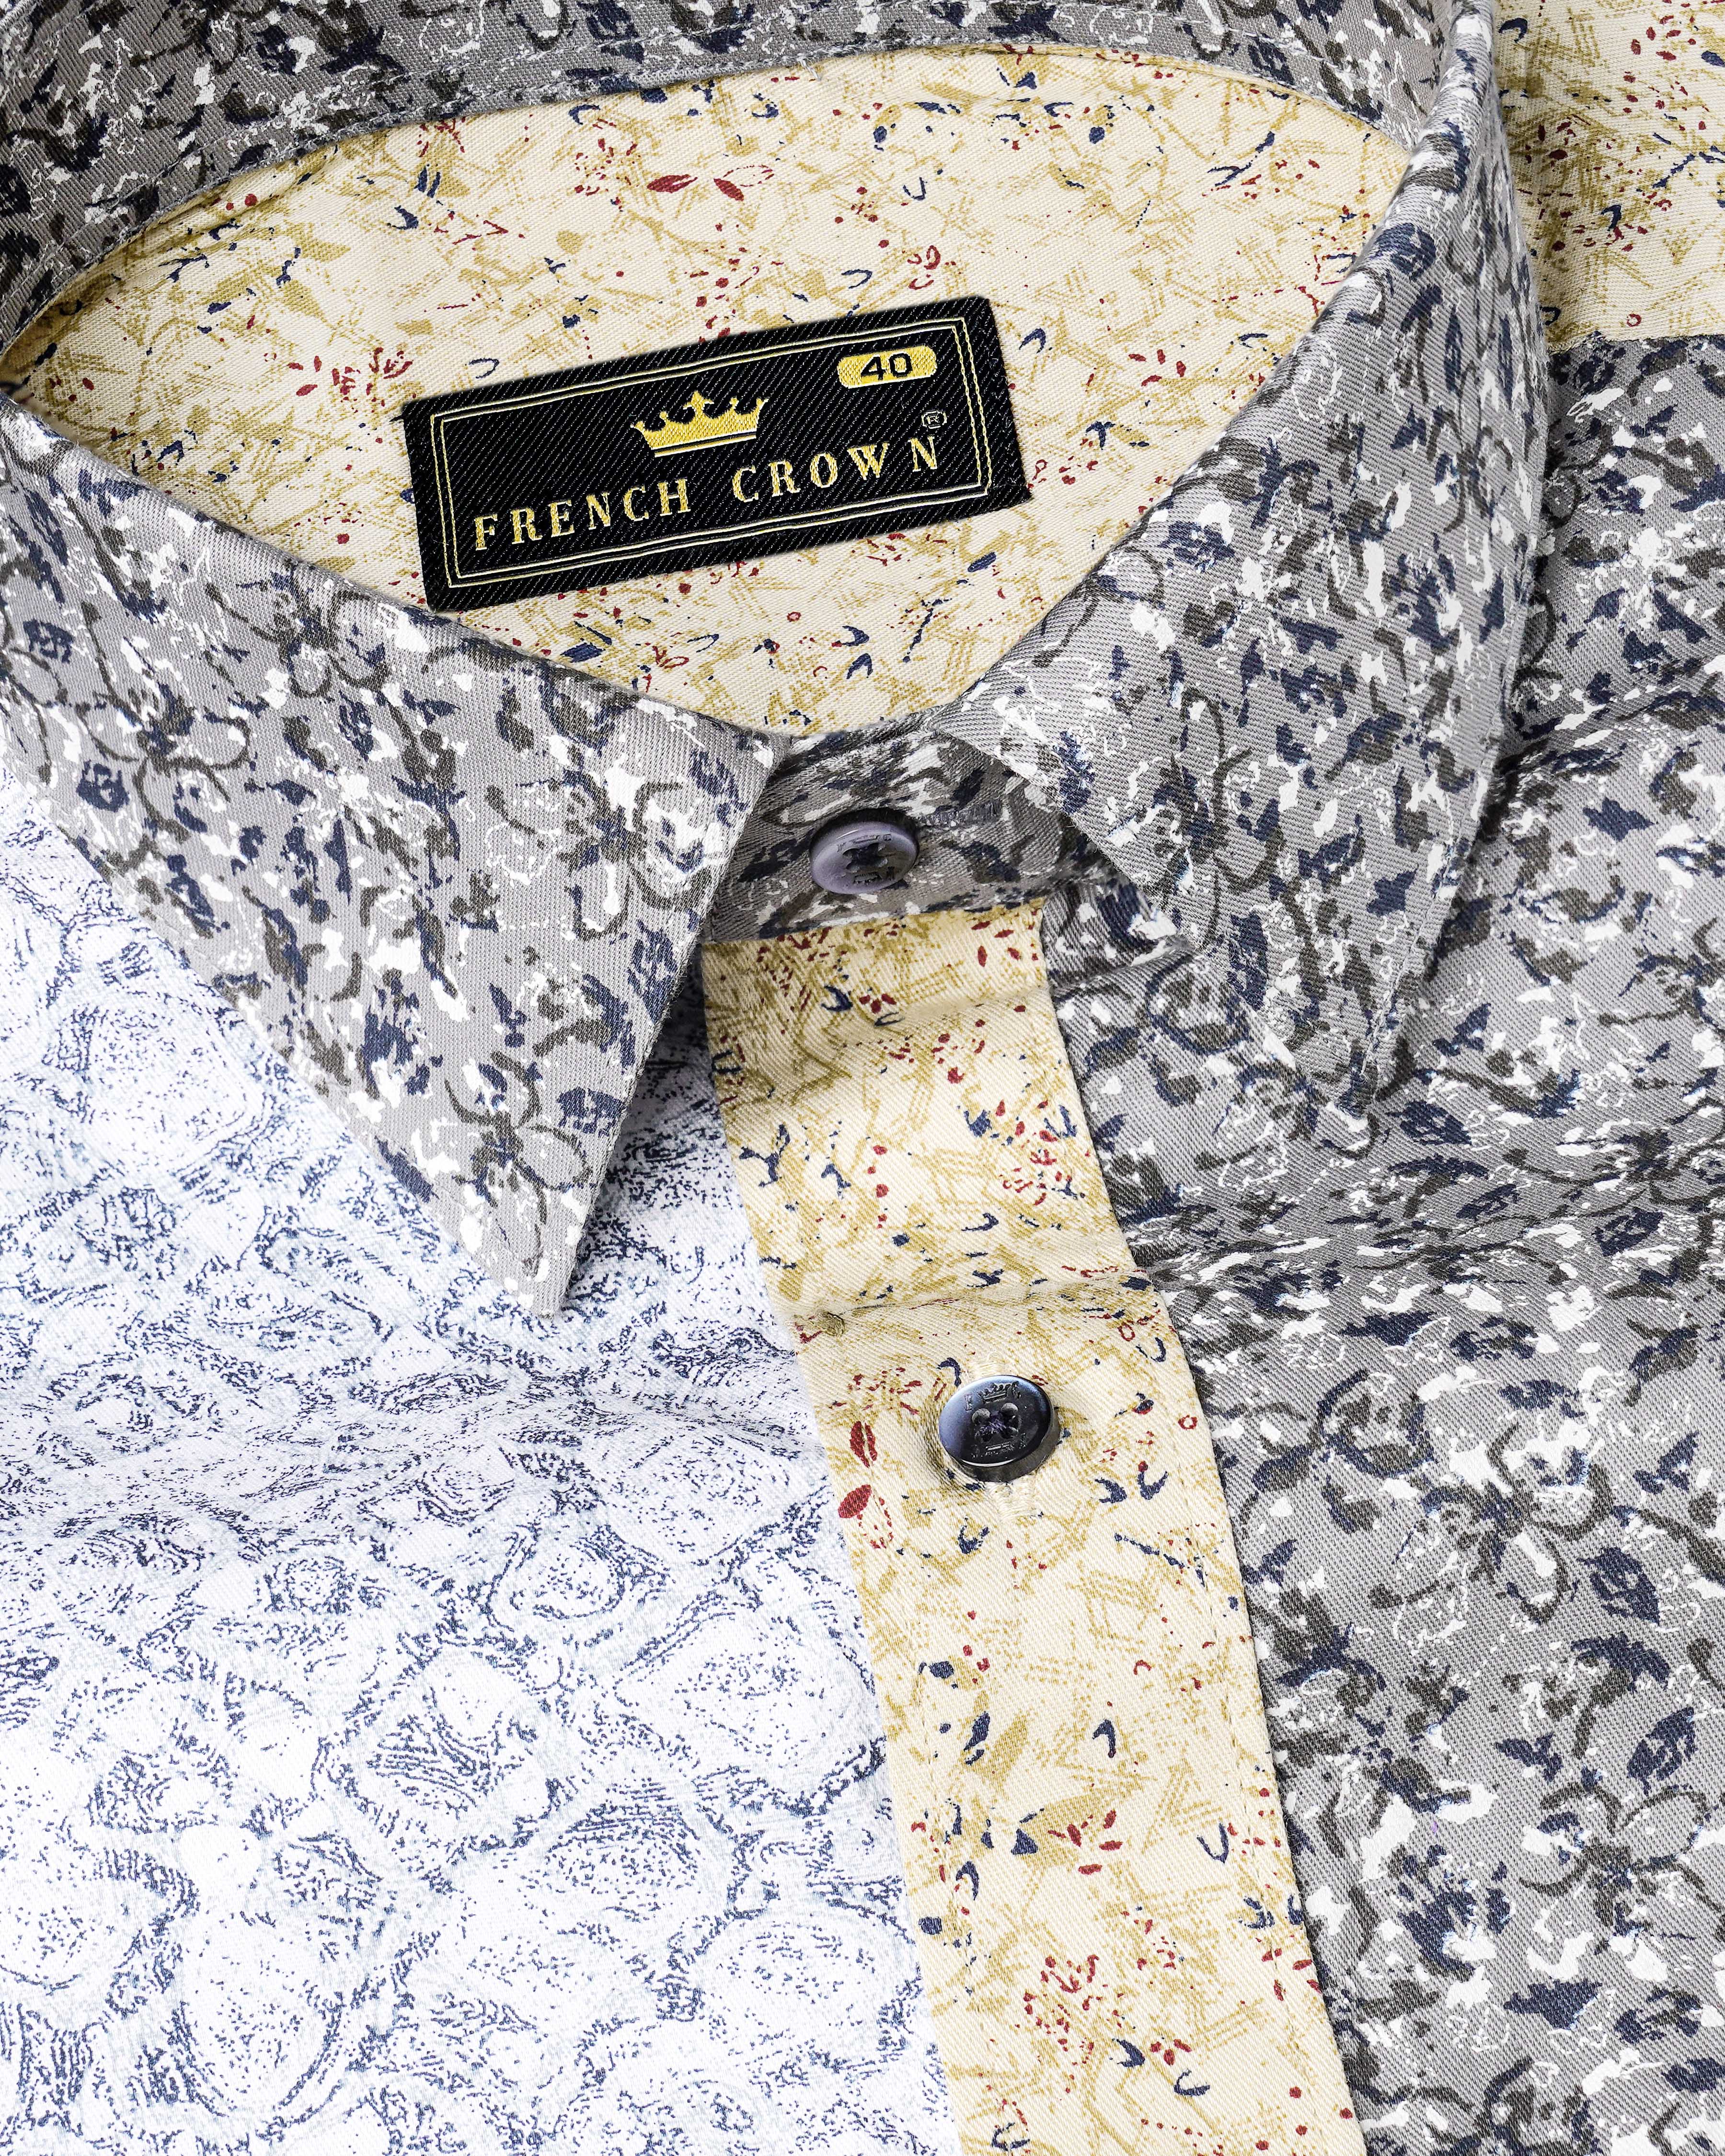 Chatelle Gray with Timberwolf Brown Ditsy Printed Twill Premium Cotton Designer Shirt 8138-BLE-P70-38, 8138-BLE-P70-H-38, 8138-BLE-P70-39, 8138-BLE-P70-H-39, 8138-BLE-P70-40, 8138-BLE-P70-H-40, 8138-BLE-P70-42, 8138-BLE-P70-H-42, 8138-BLE-P70-44, 8138-BLE-P70-H-44, 8138-BLE-P70-46, 8138-BLE-P70-H-46, 8138-BLE-P70-48, 8138-BLE-P70-H-48, 8138-BLE-P70-50, 8138-BLE-P70-H-50, 8138-BLE-P70-52, 8138-BLE-P70-H-52